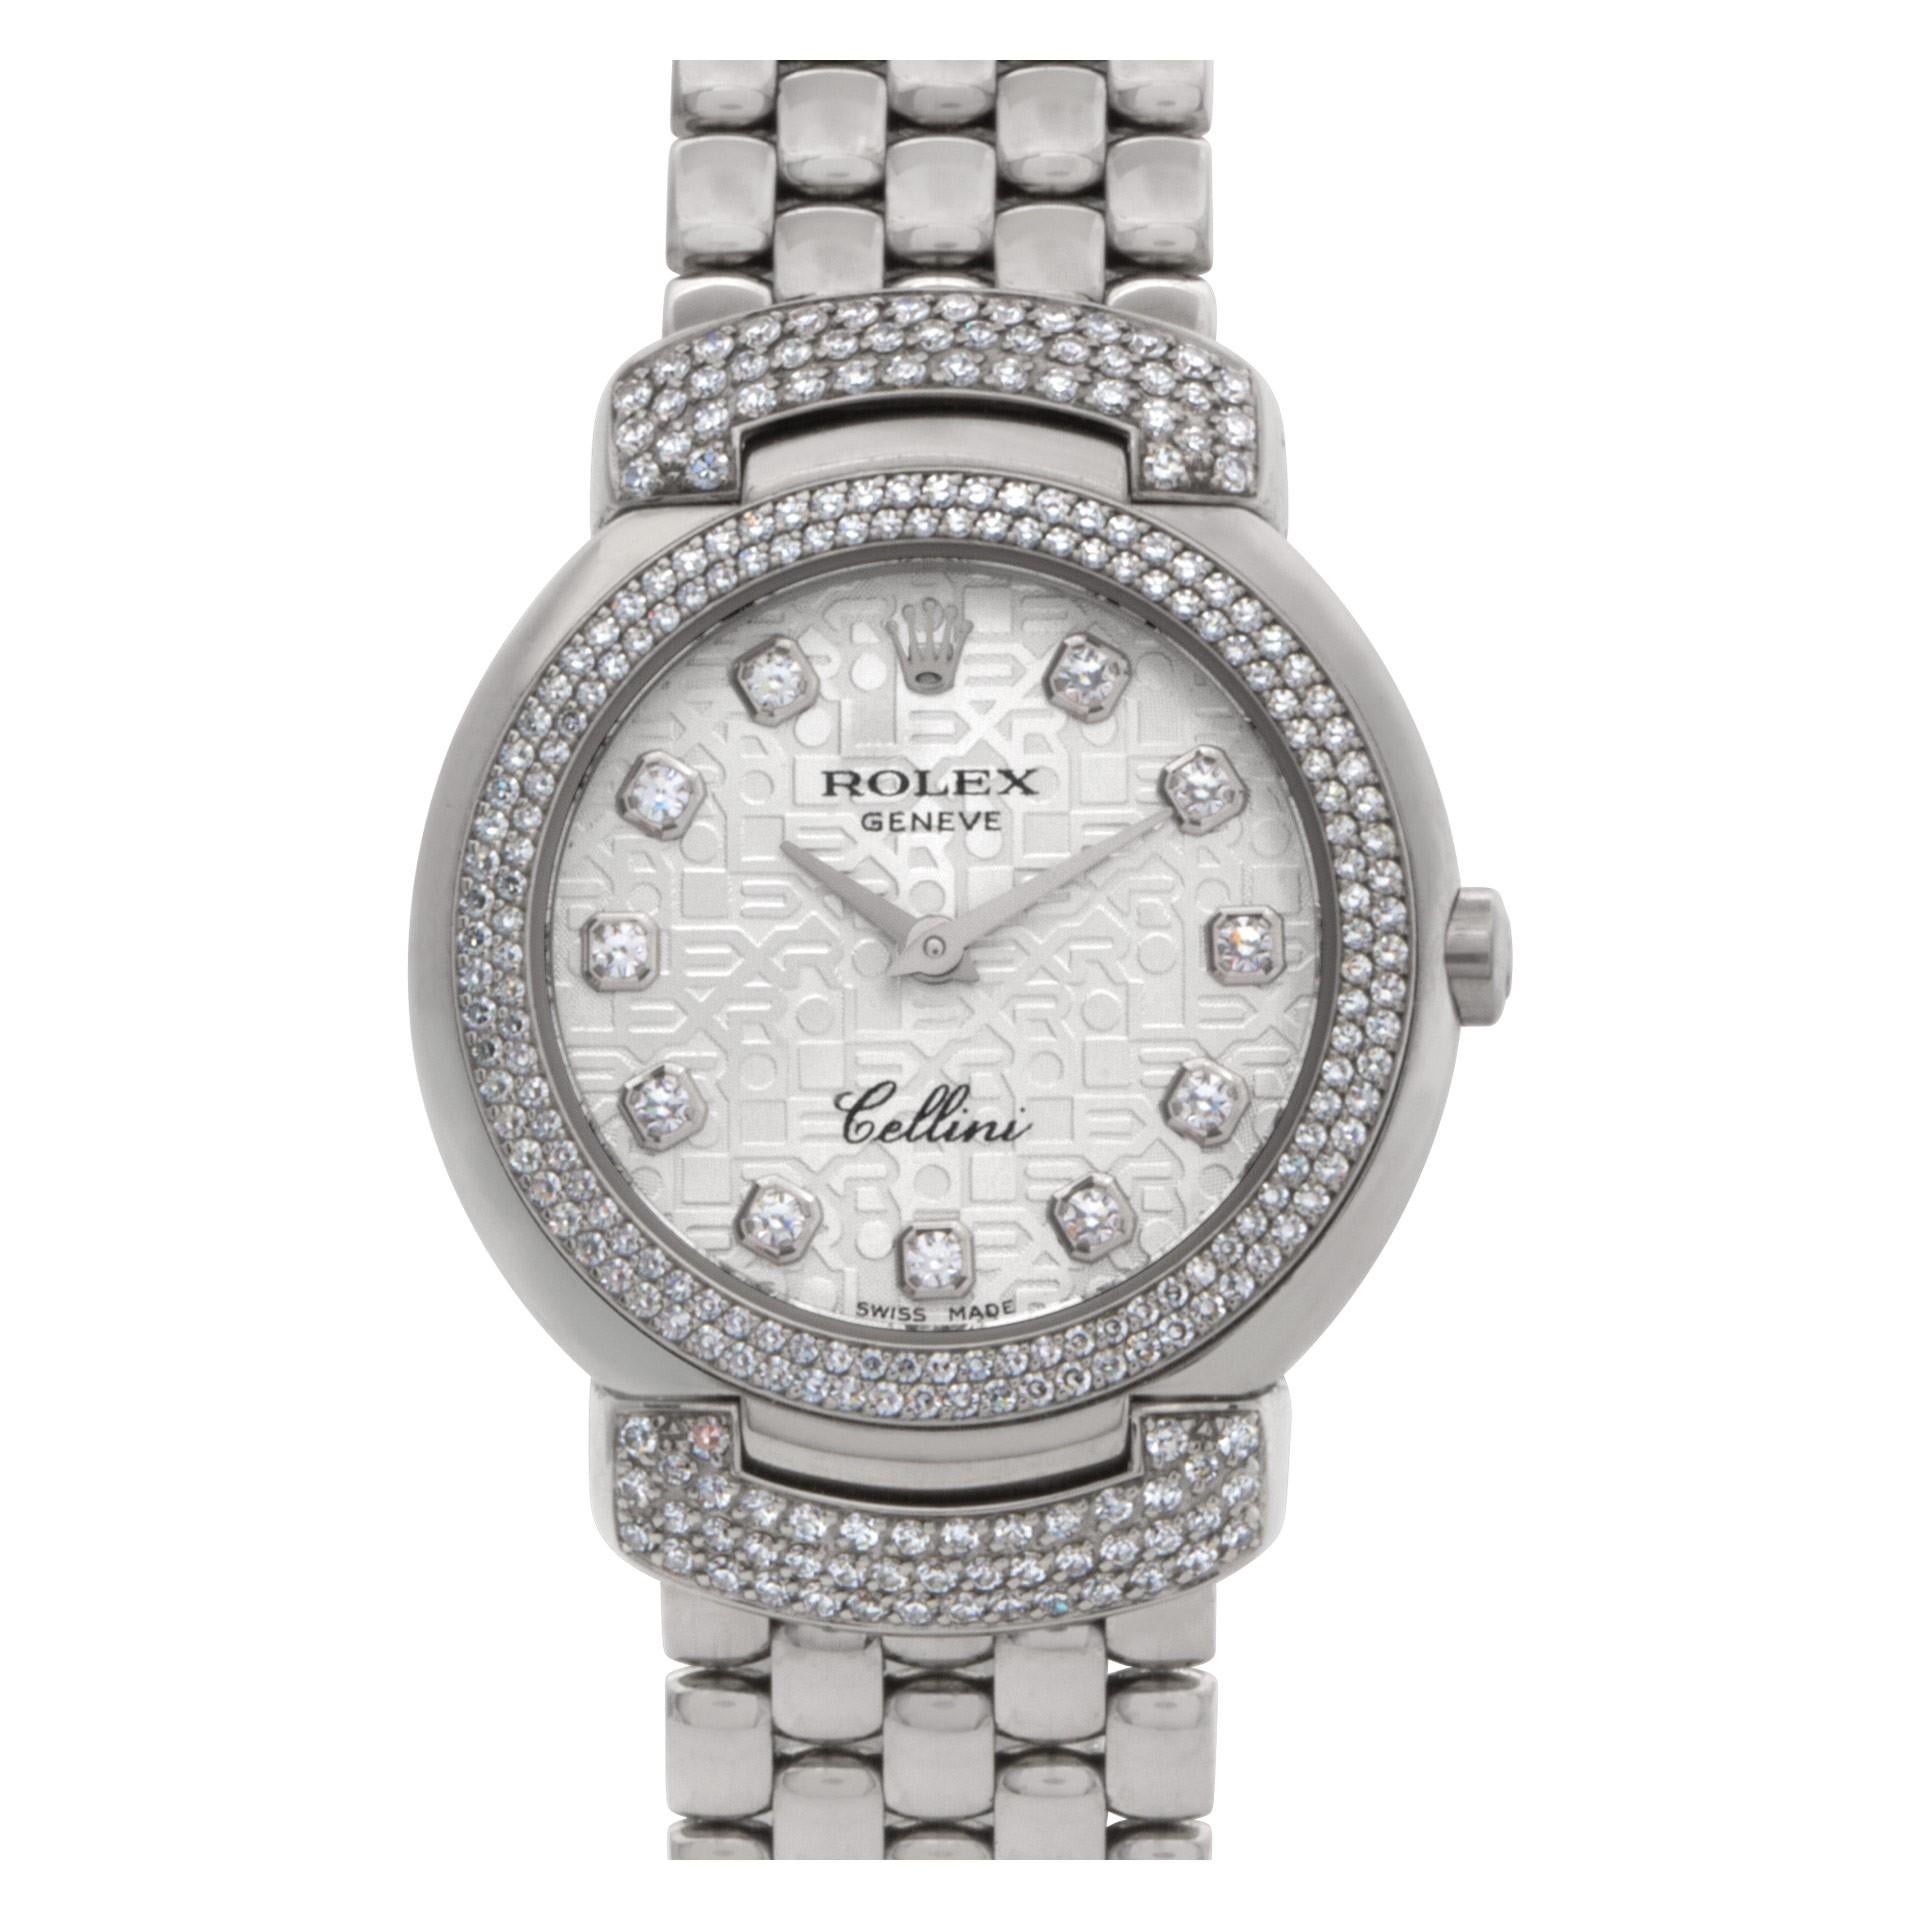 Rolex Cellini in 18k white gold with factory original diamond bezel, lugs and diamond anniversary dial. Quartz. 26 mm case size. Ref 6673. Circa 2006. Fine Pre-owned Rolex Watch.

YOUR PRICE: $14,800.00

Certified preowned Dress Rolex Cellini